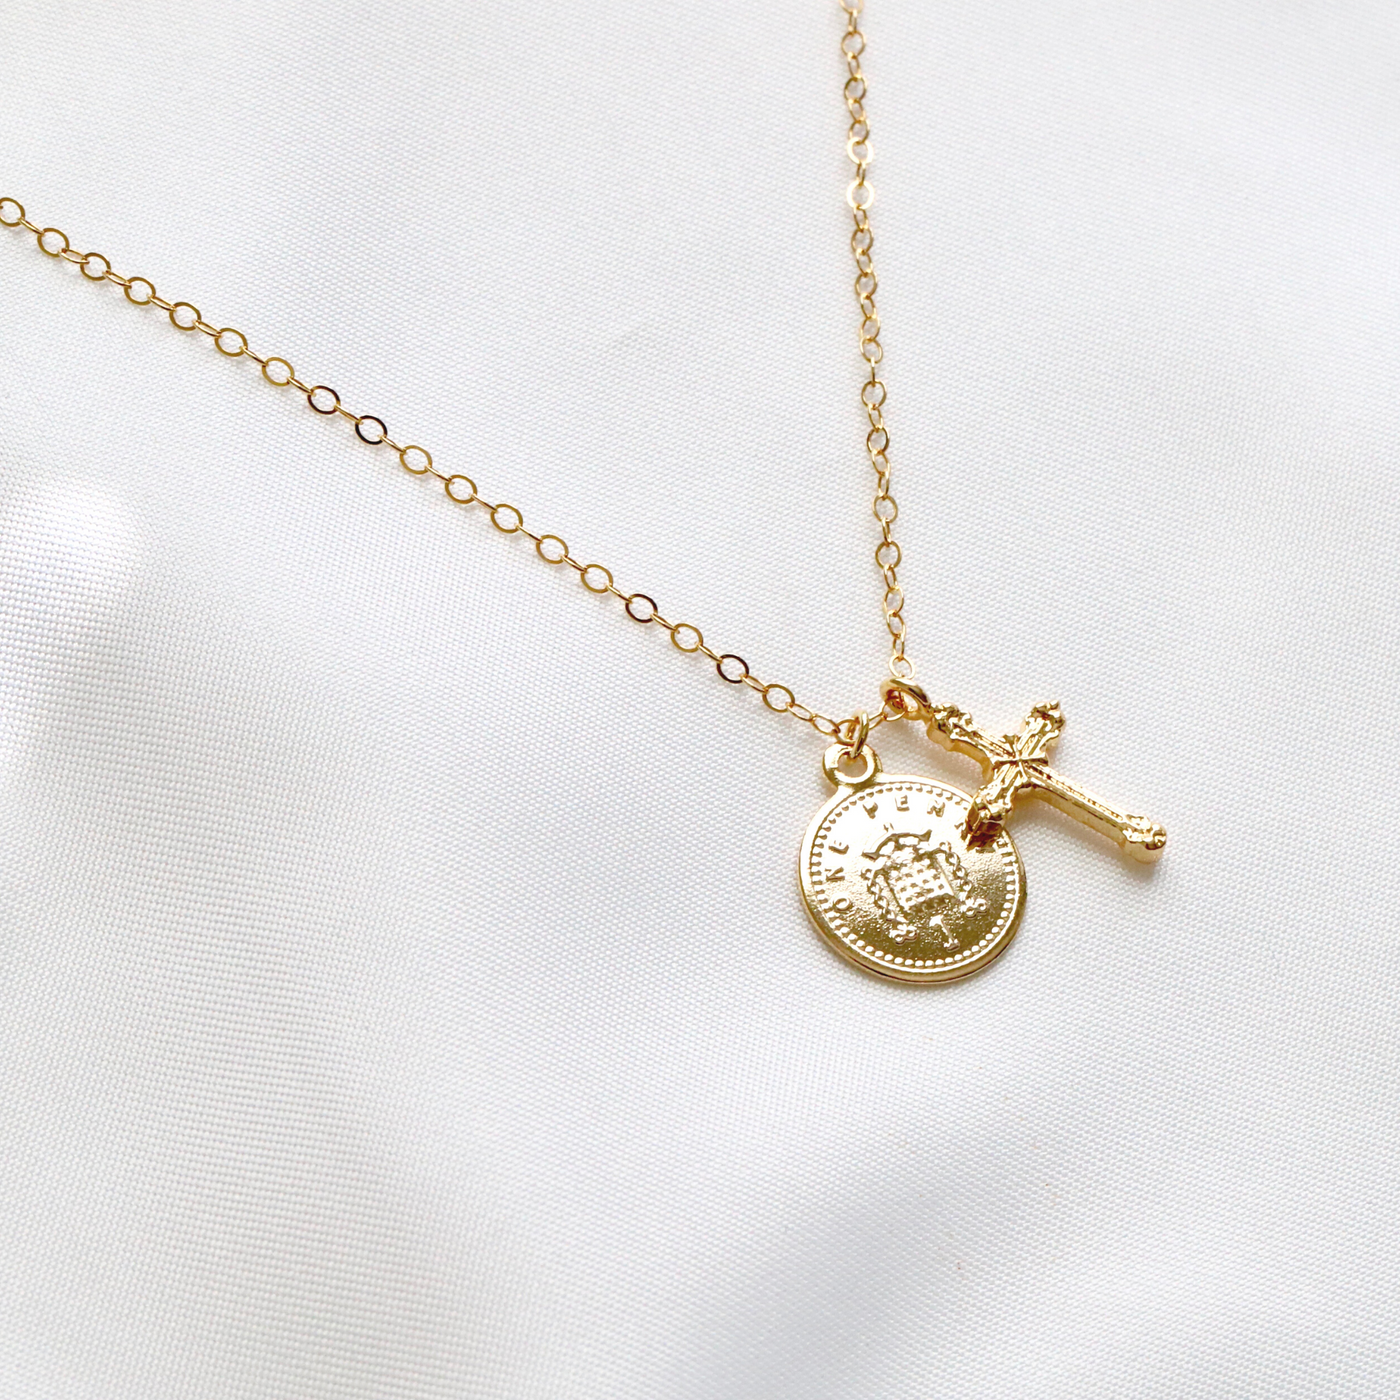 Minimalist 14K gold filled coin and cross necklace